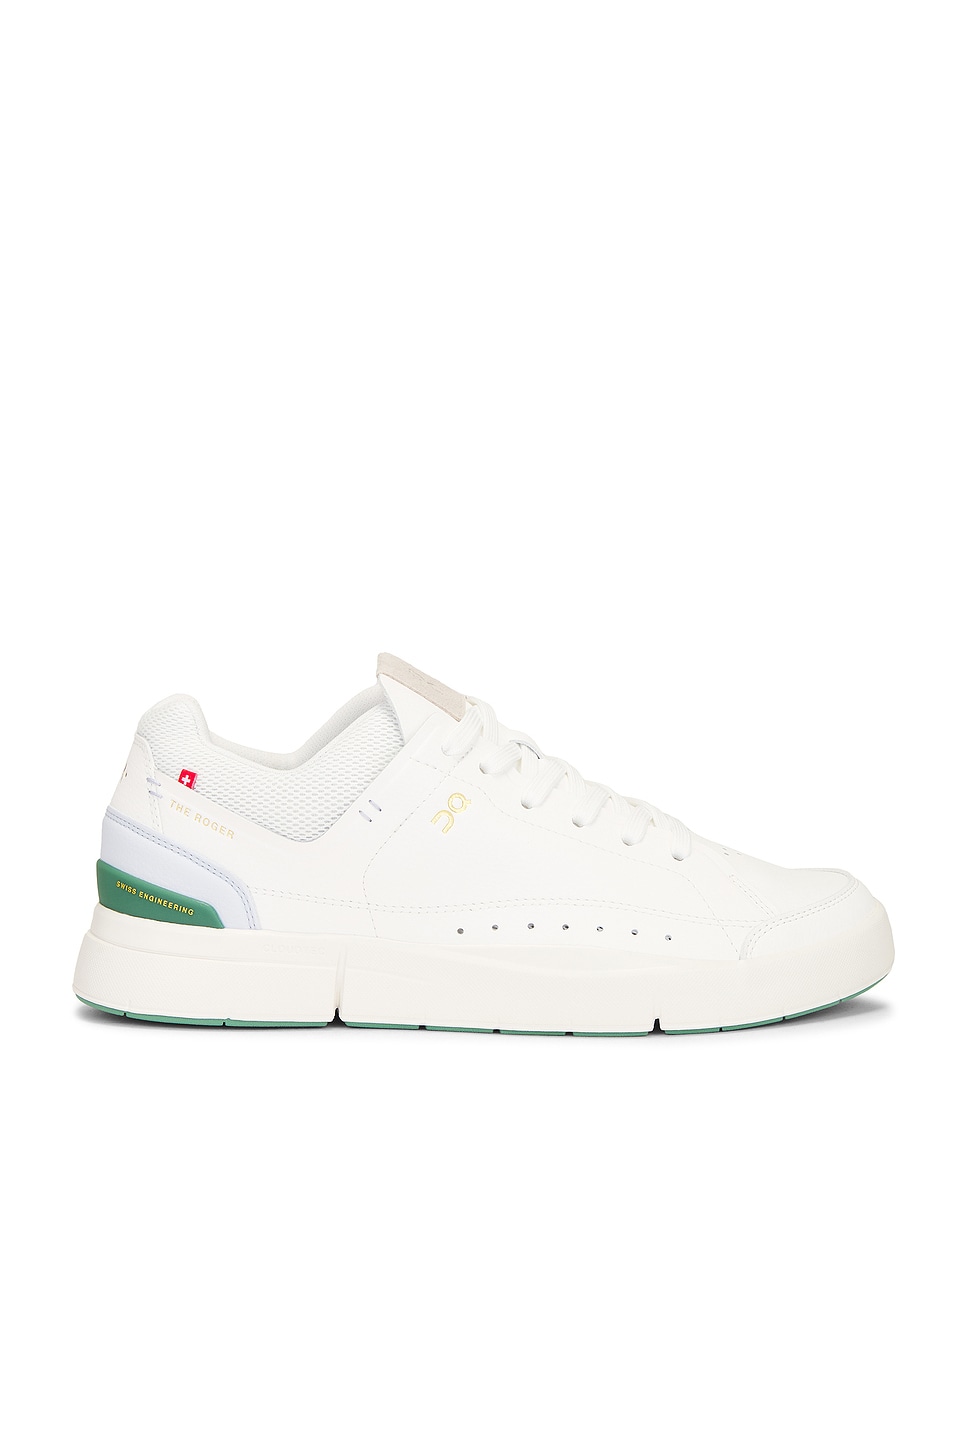 Image 1 of On The Roger Centre Court Sneaker in White & Green